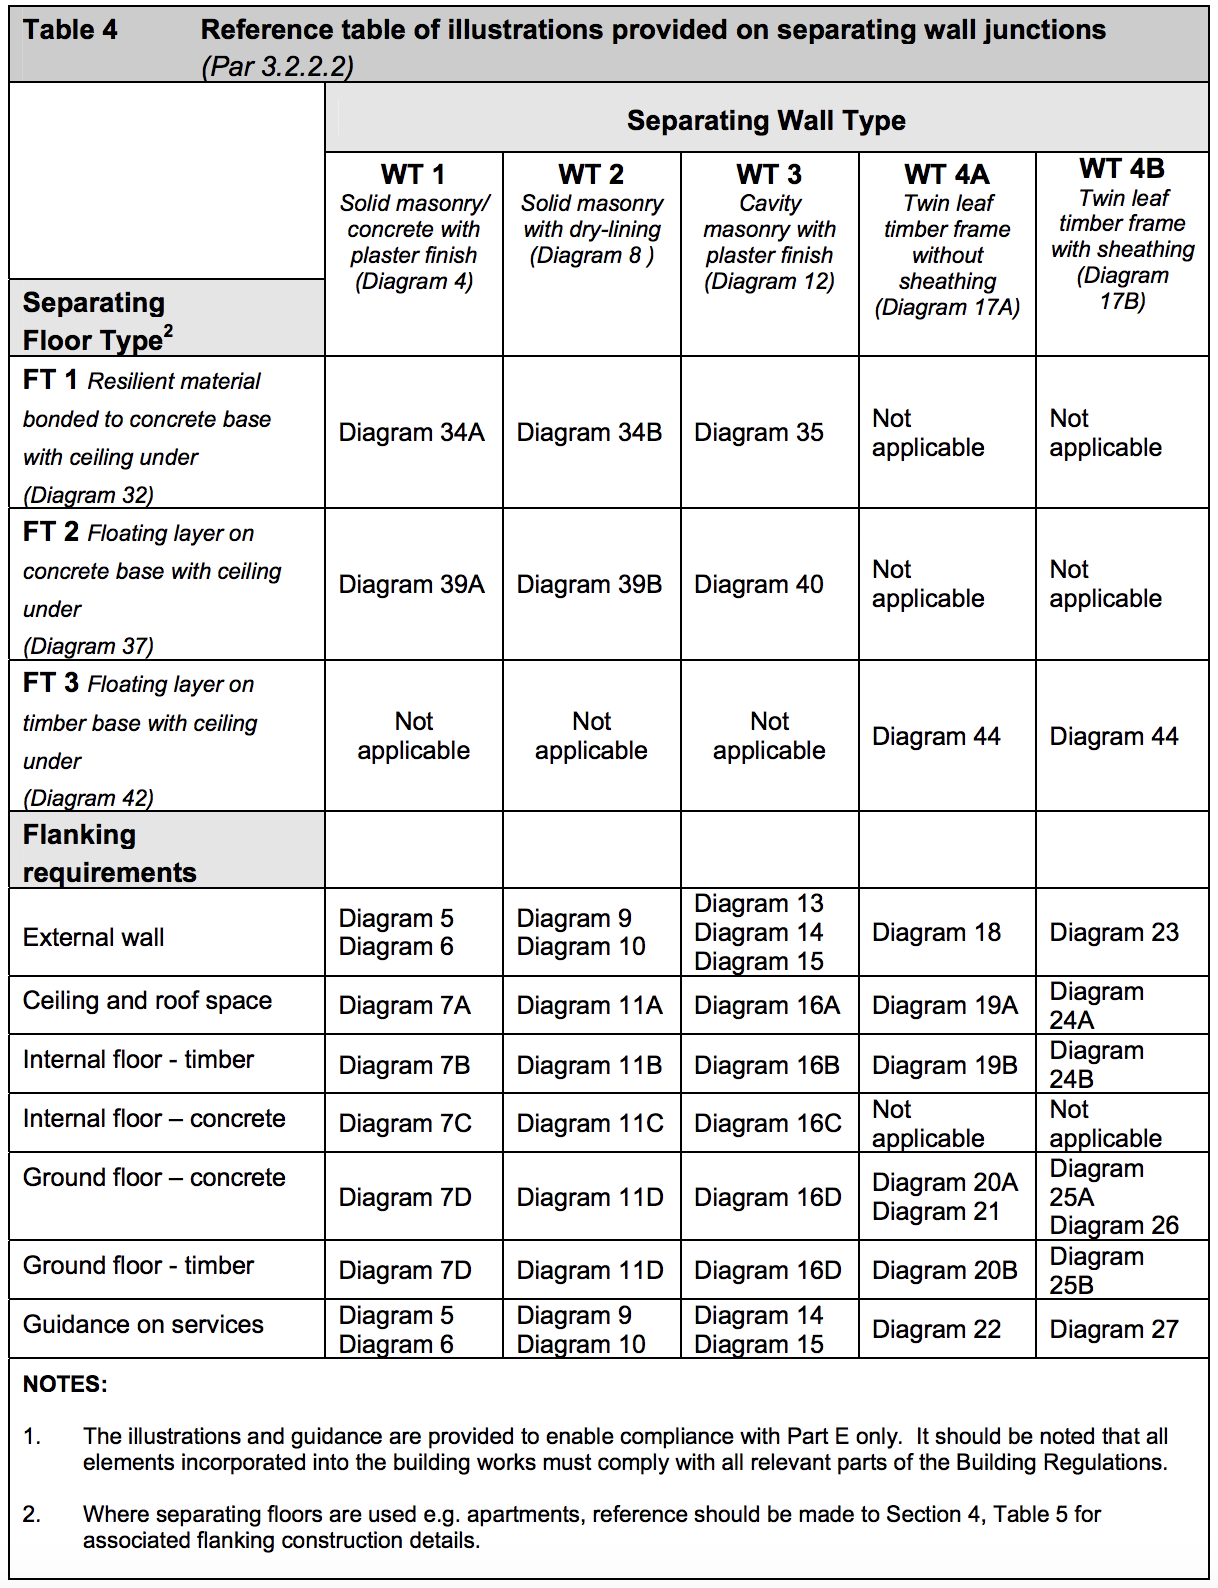 Table HE4 - Reference table of illustrations provided on separating wall junctions - Extract from TGD E